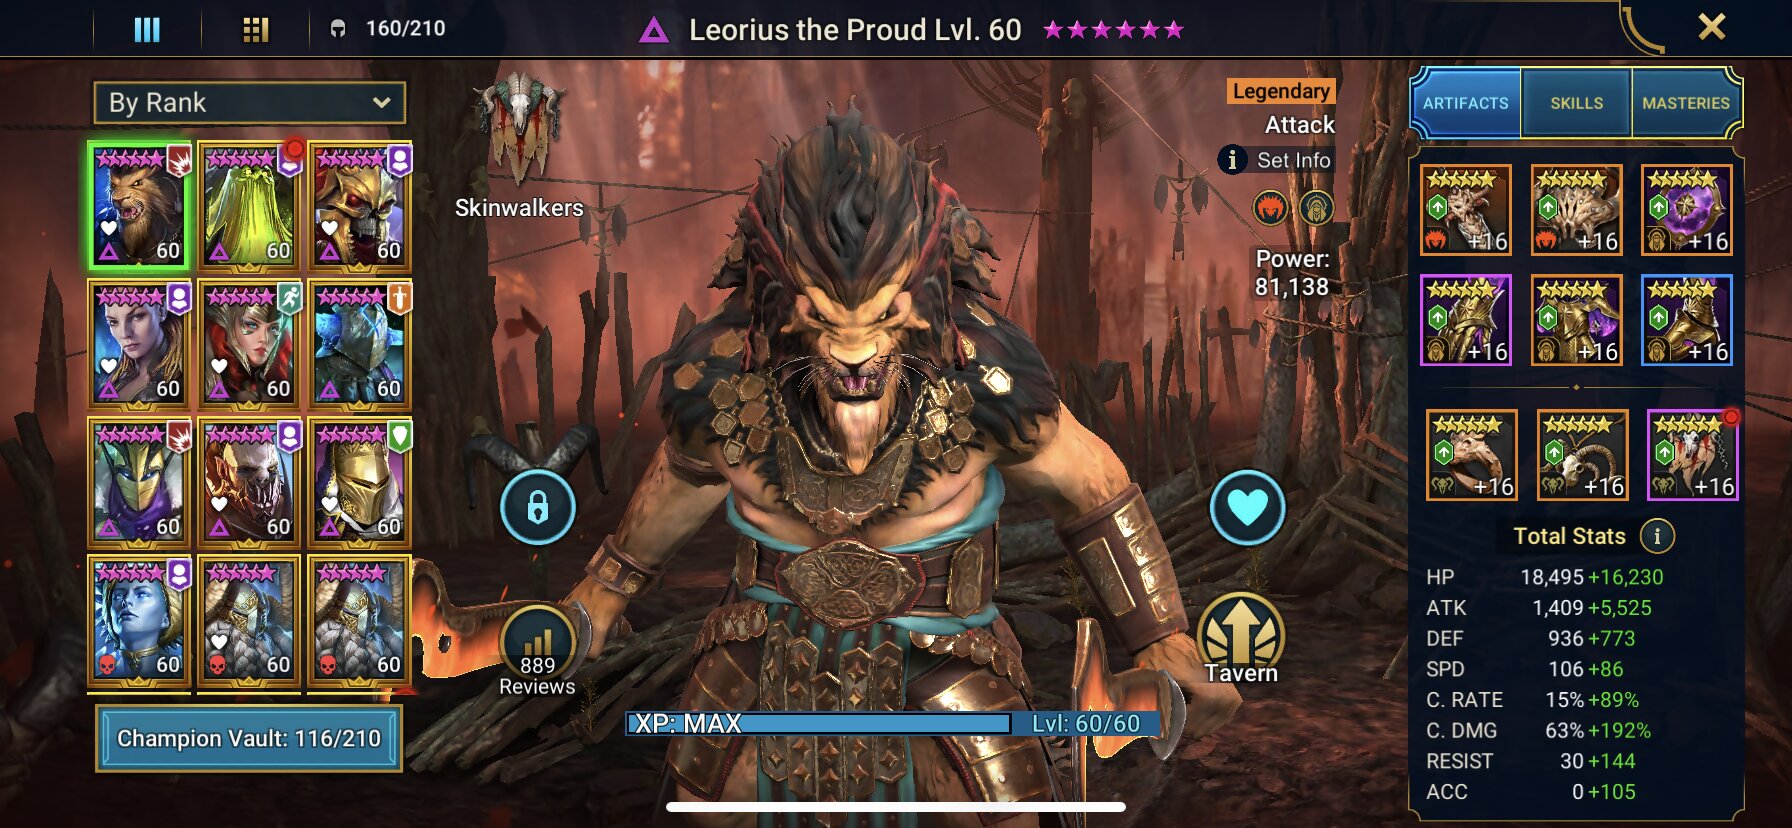 Leorius gear and stats build